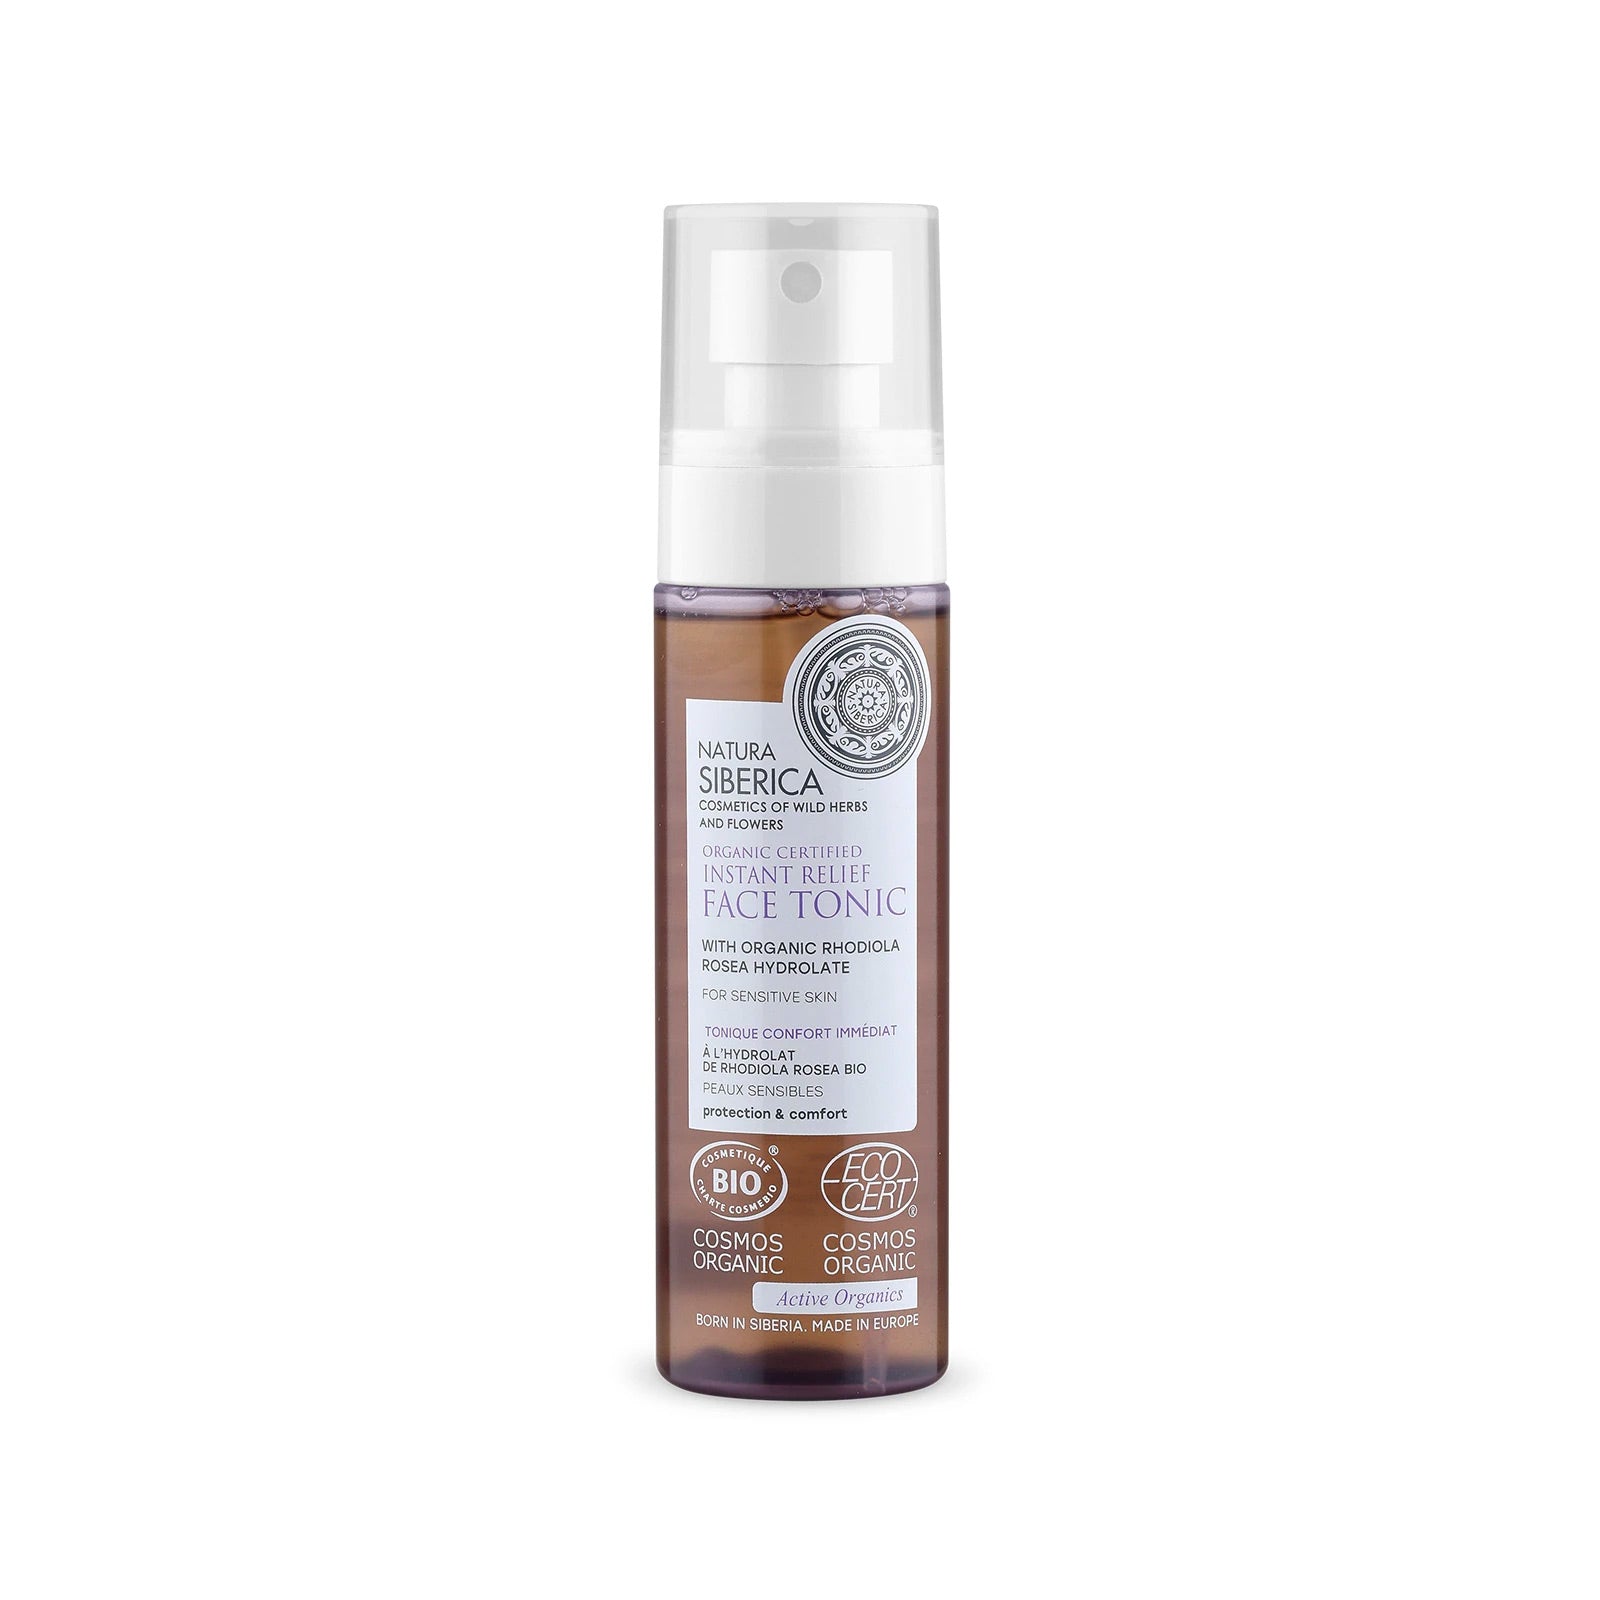 Image of Natura Siberica Organic Certified Instant Relief Face Tonic for sensitive skin, 100 ml